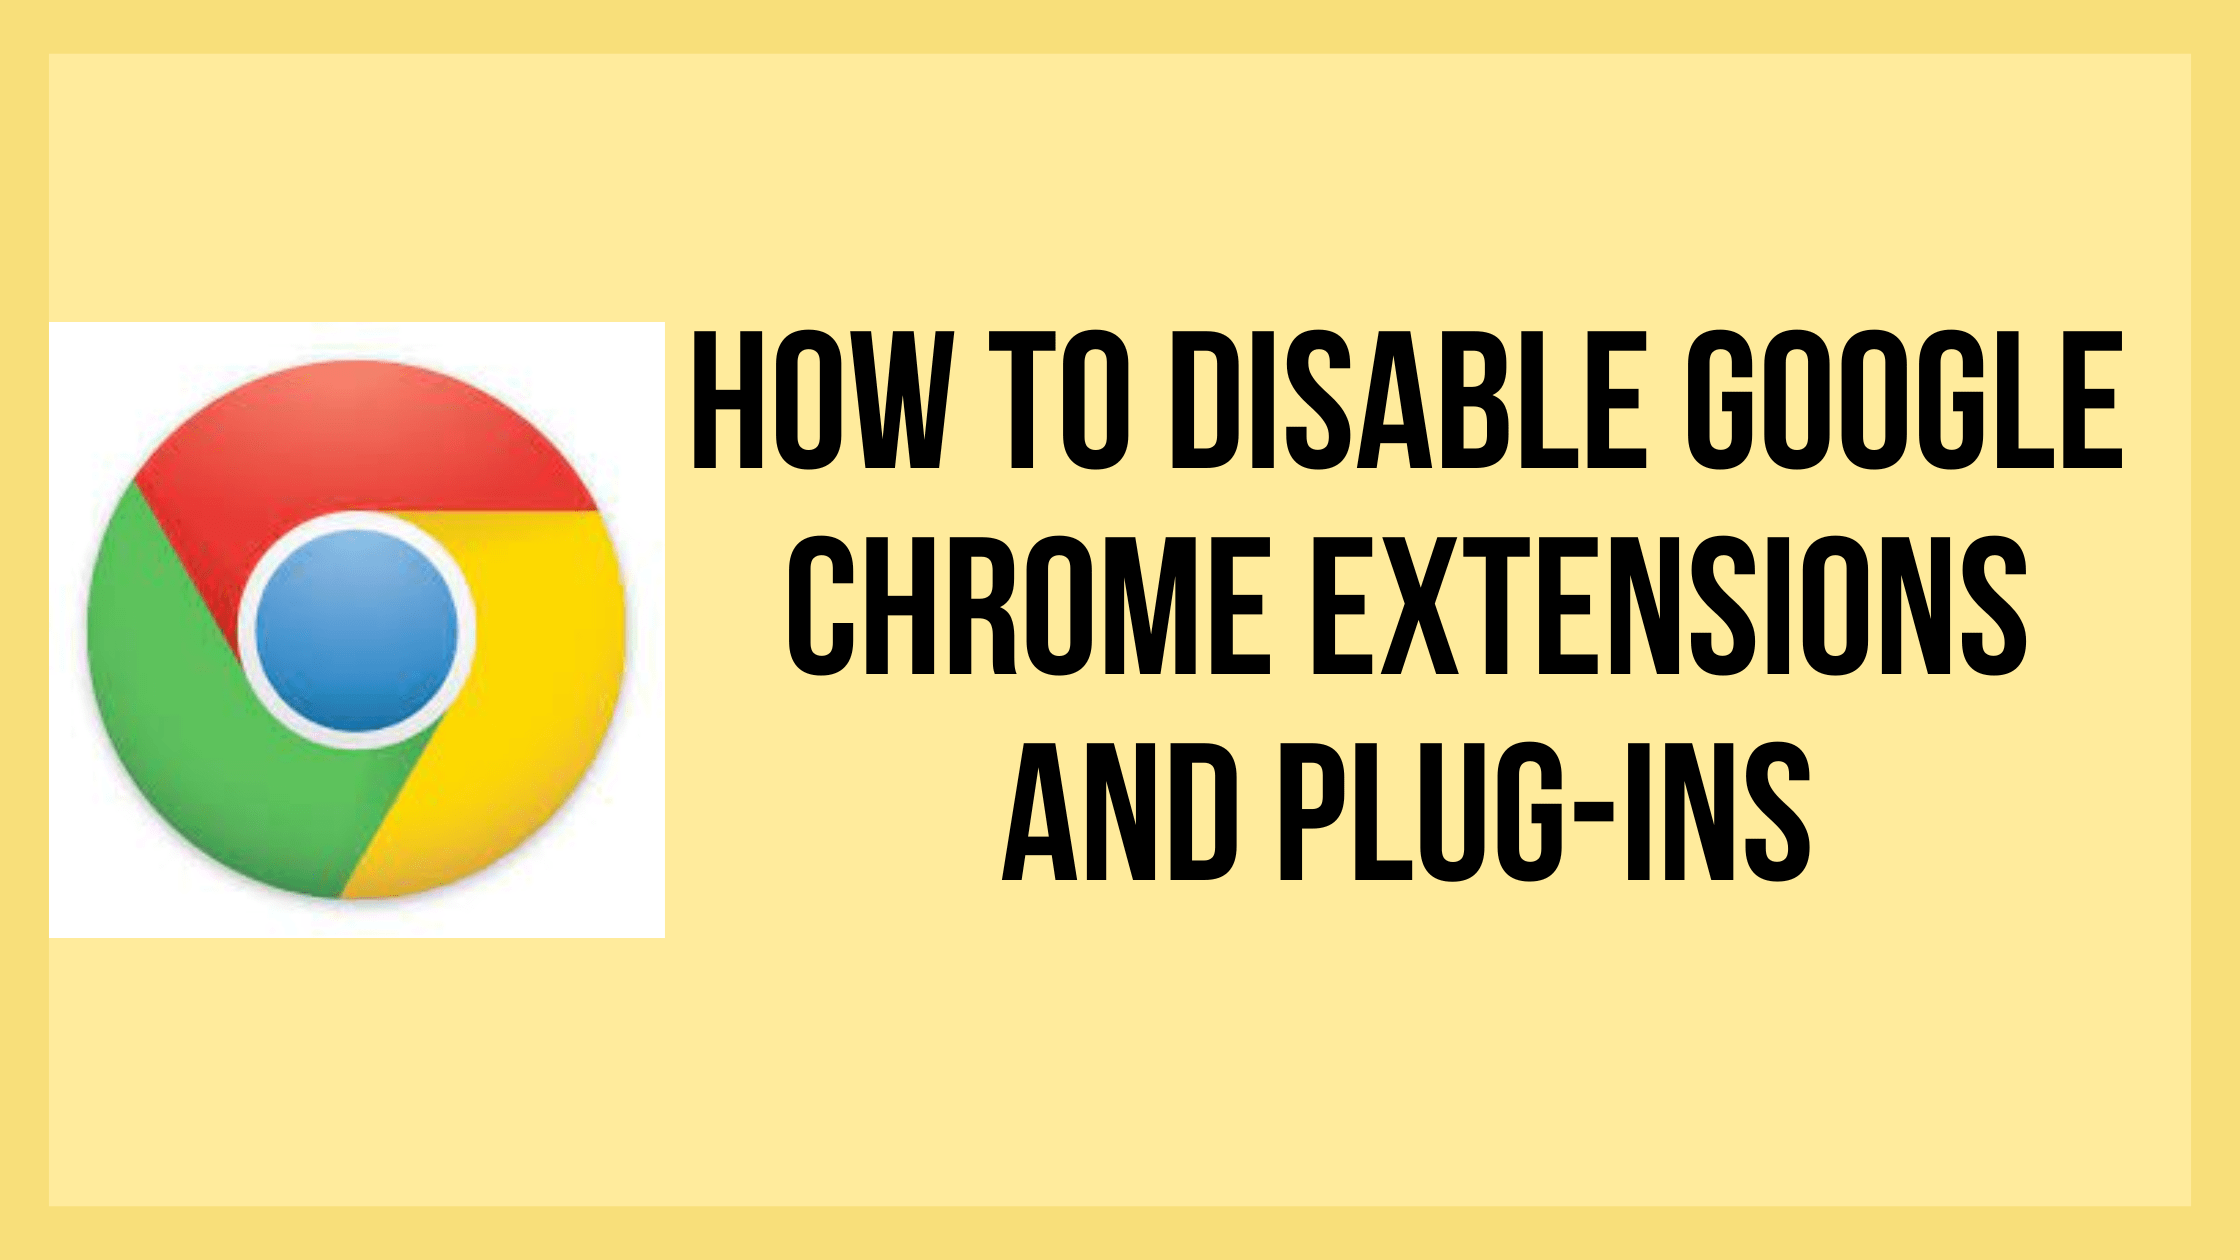 How to Disable Google Chrome Extensions and Plug-ins